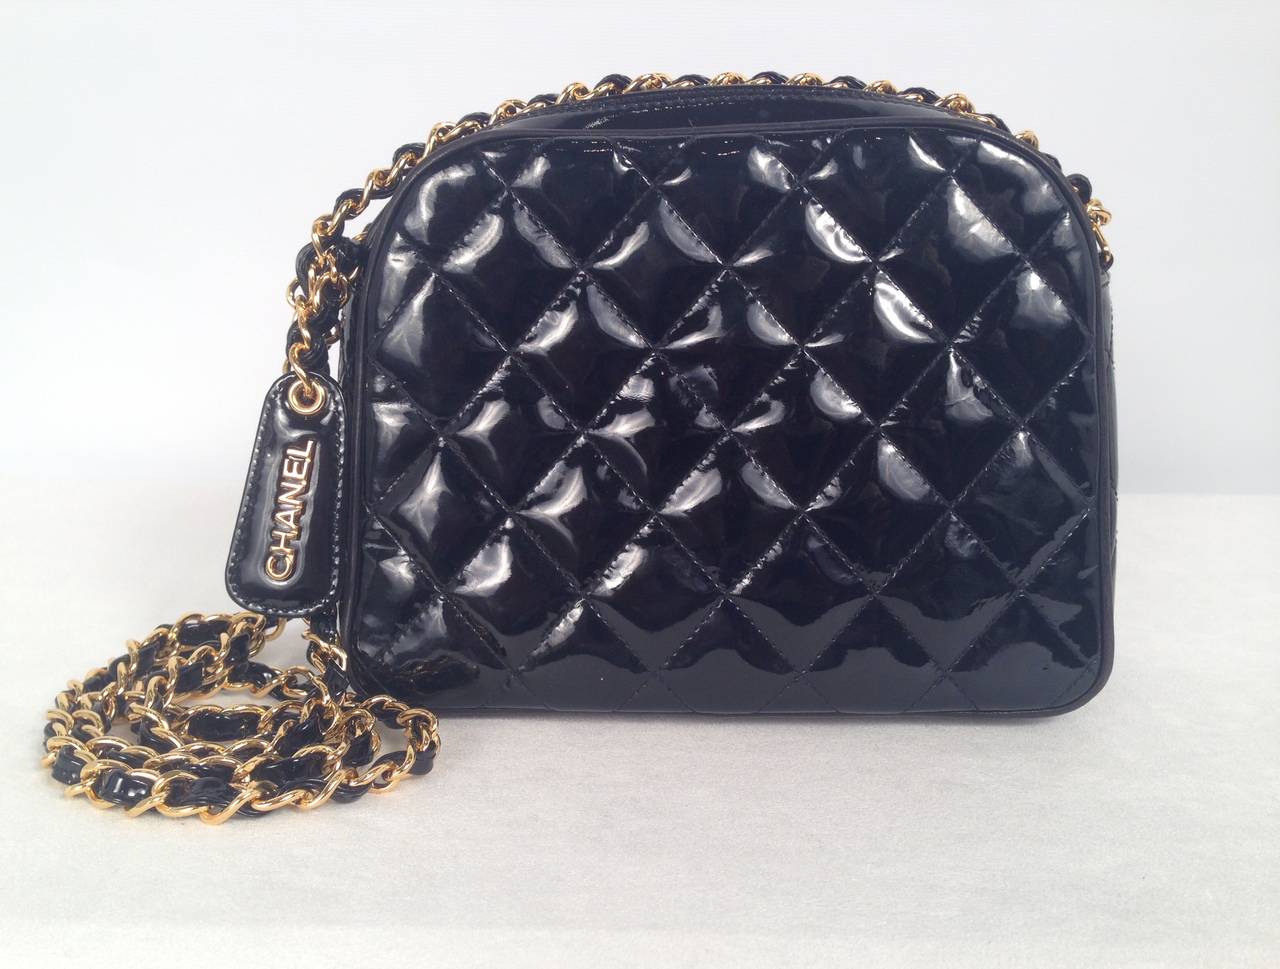 1990s Chanel Black Leather Quilted Camera Bag is 